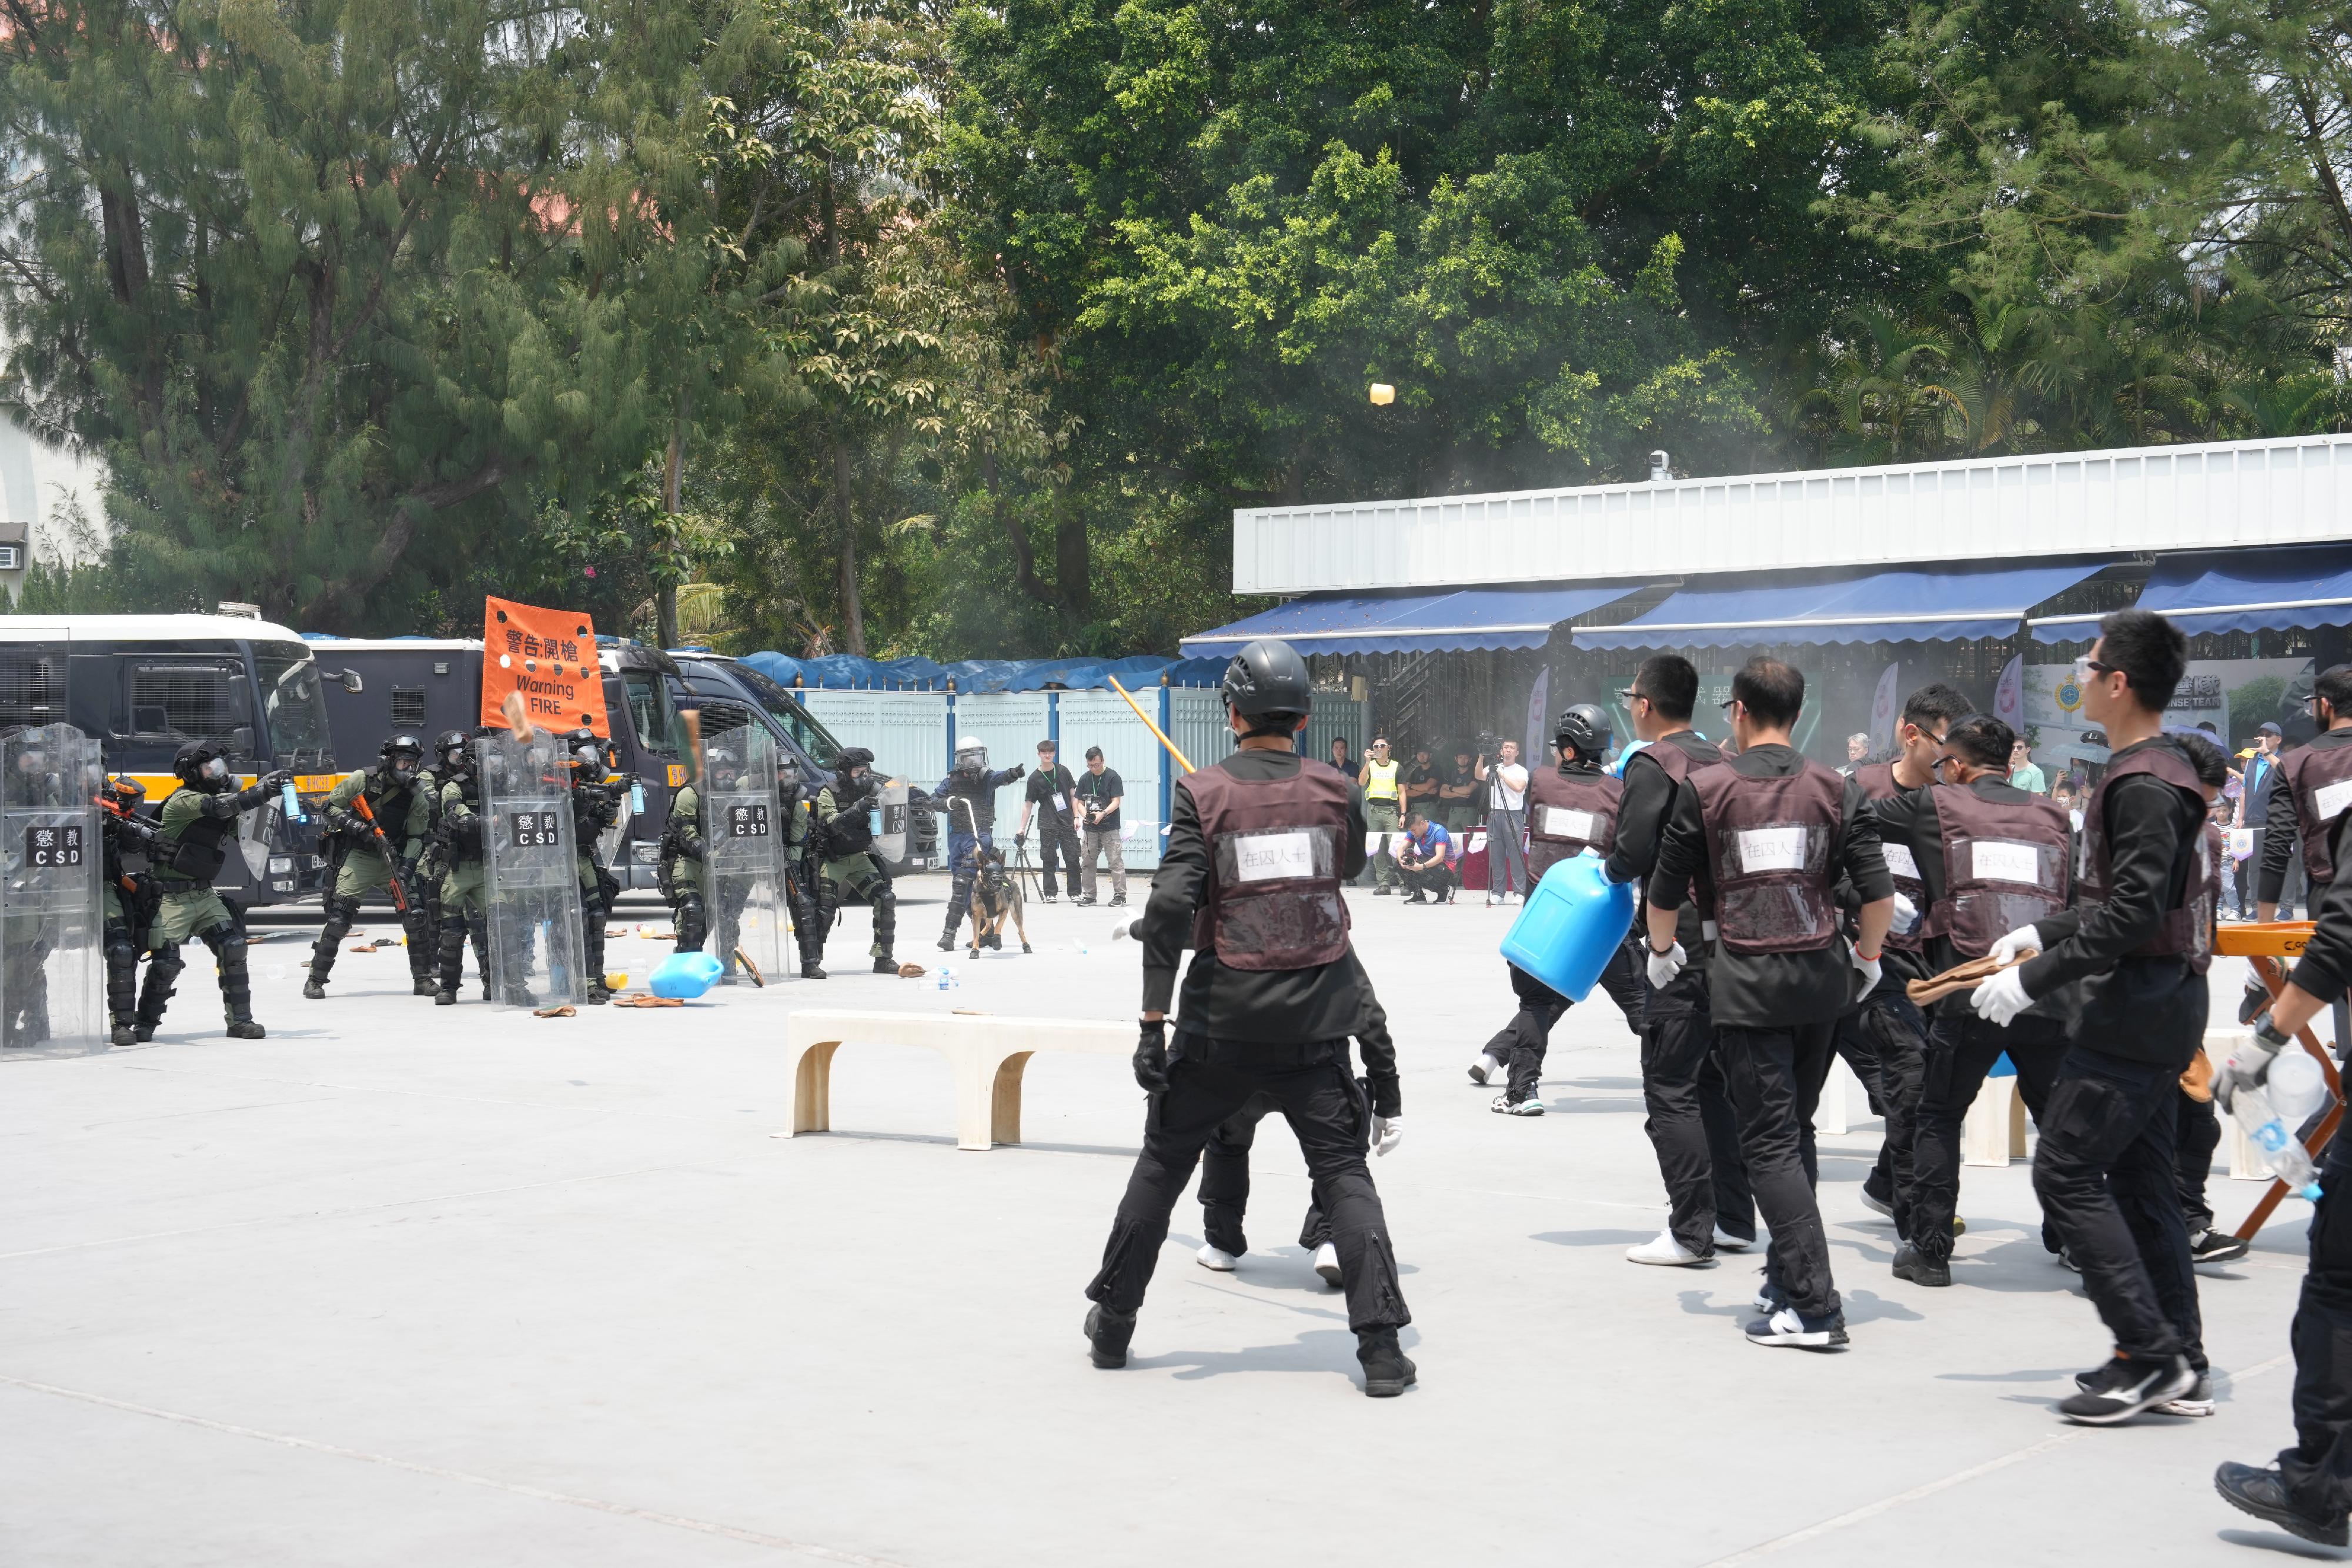 The Correctional Services Department held an open day at the Hong Kong Correctional Services Academy today (April 15), the National Security Education Day, to deepen the public's understanding of national security and the work of the department, including its work and effectiveness in safeguarding national security. Photo shows a demonstration by the Regional Response Team.